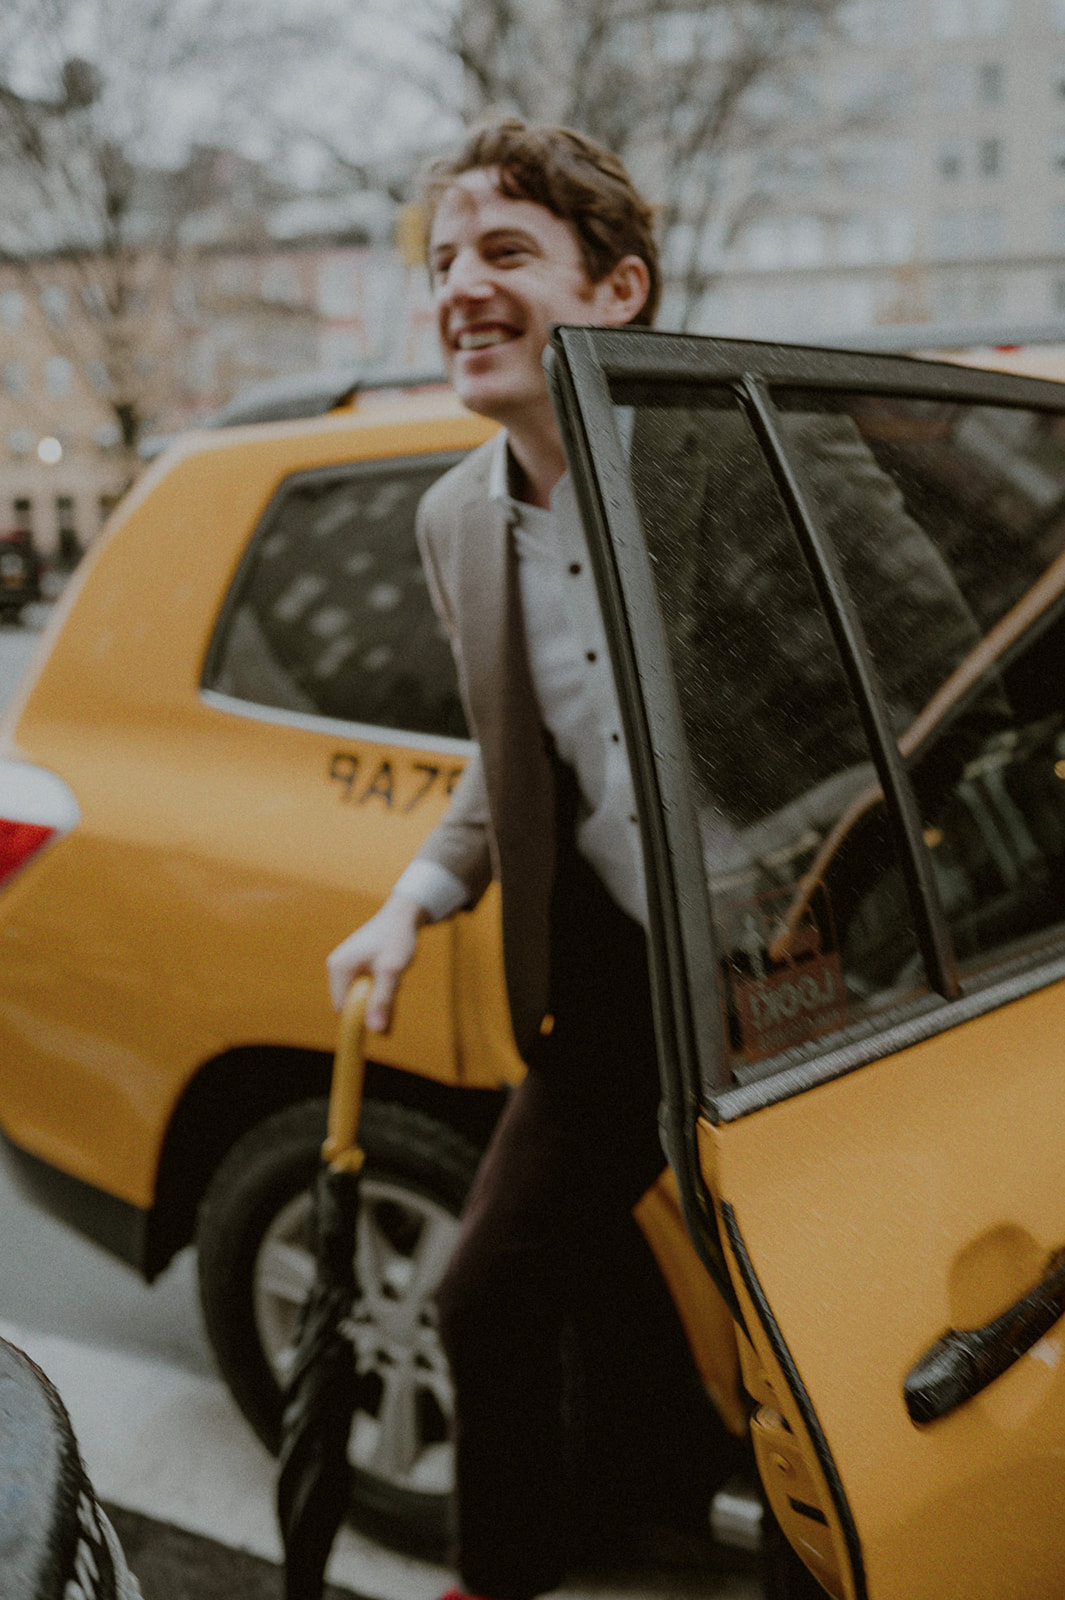 man getting out of taxi cab and grinning